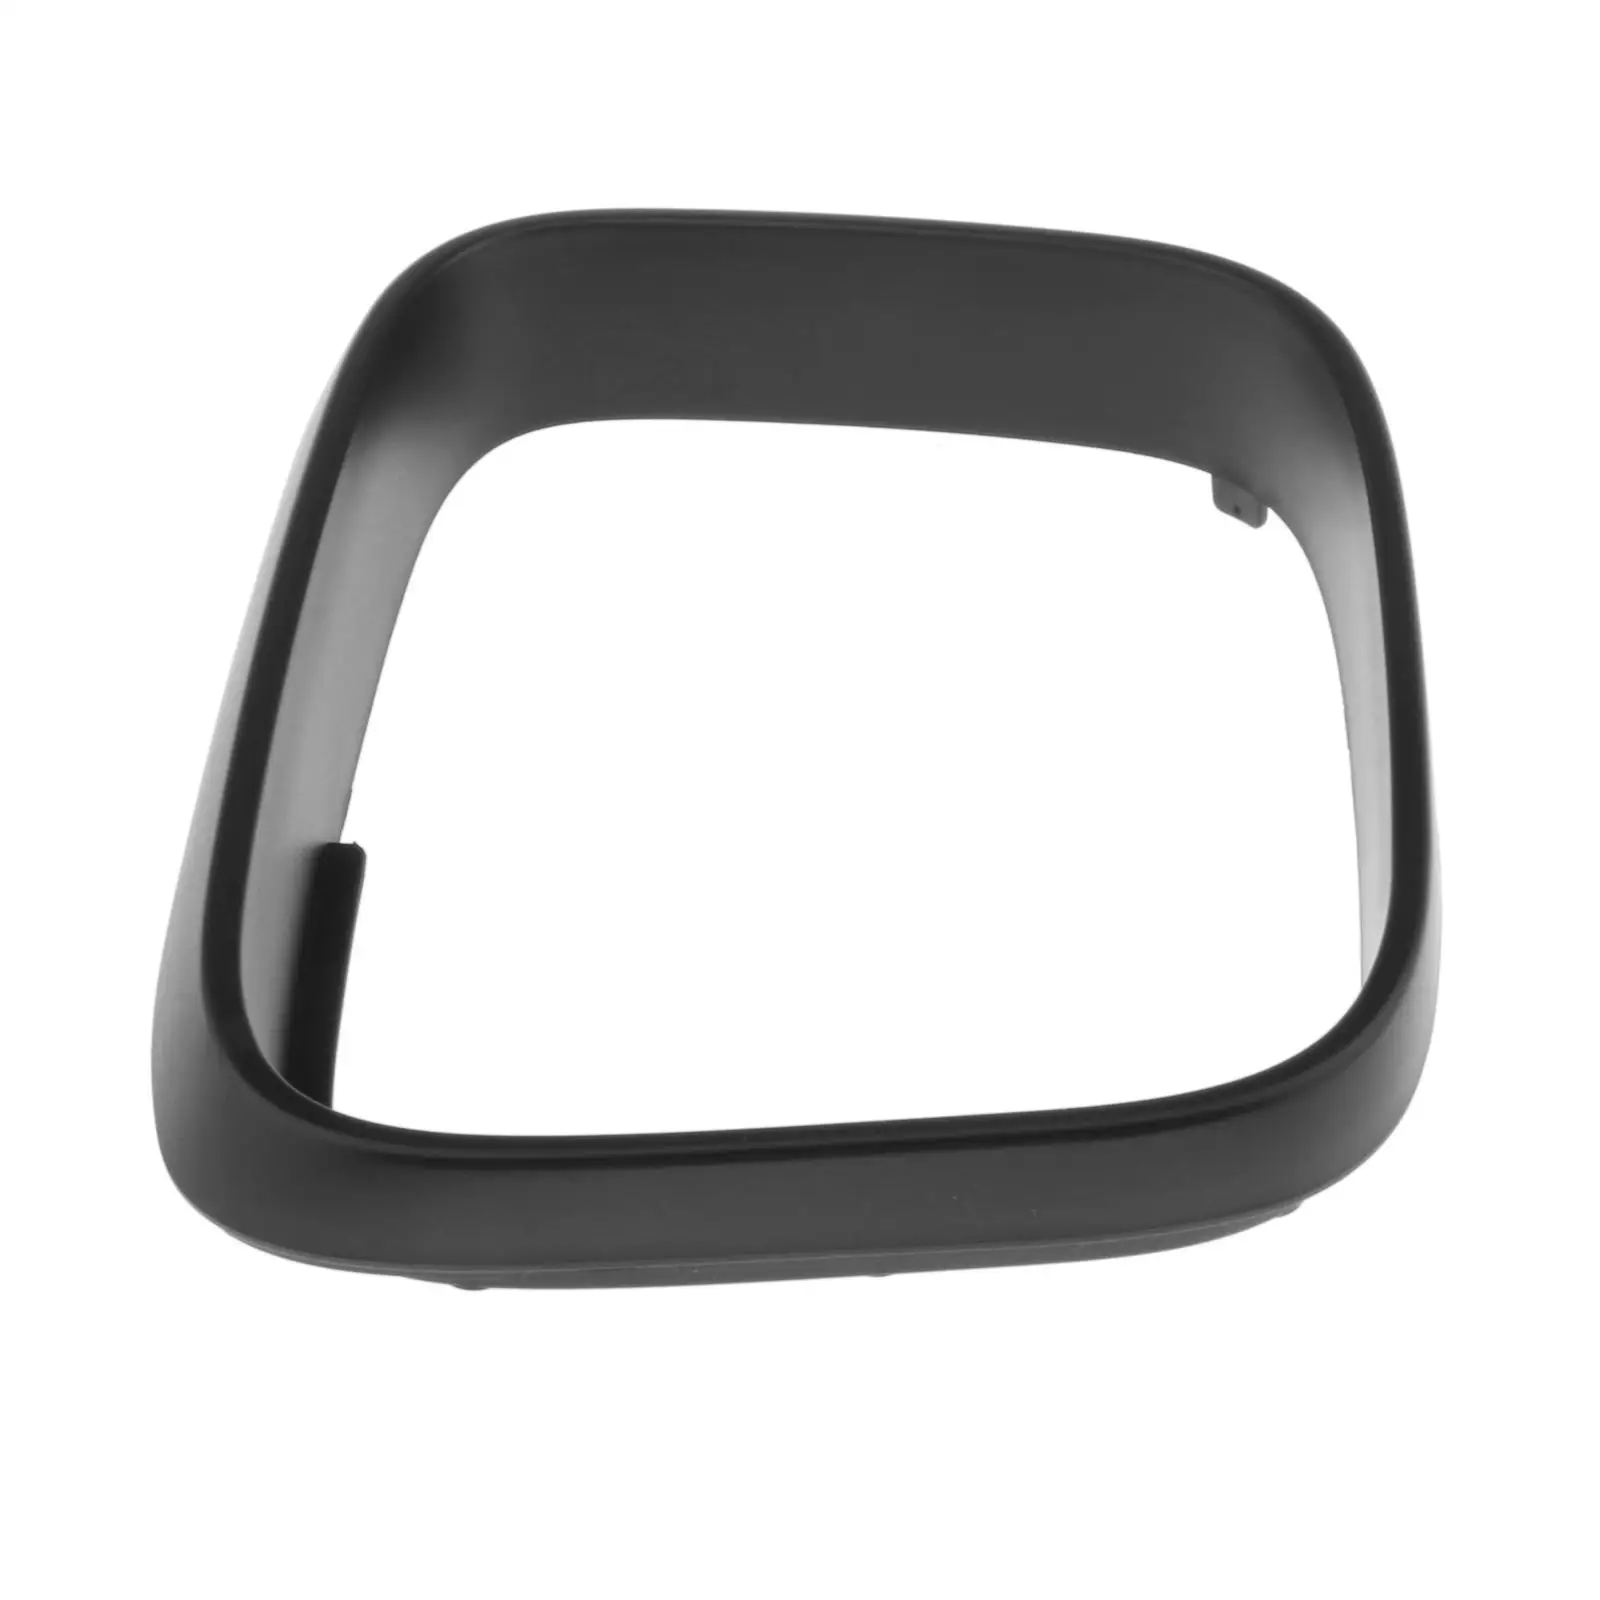 Rear View Right Side Door Mirror Housing Frame Cover Cap Trim, for VW Caddy and Maxi 2004 - Current Cars Accessory, Black